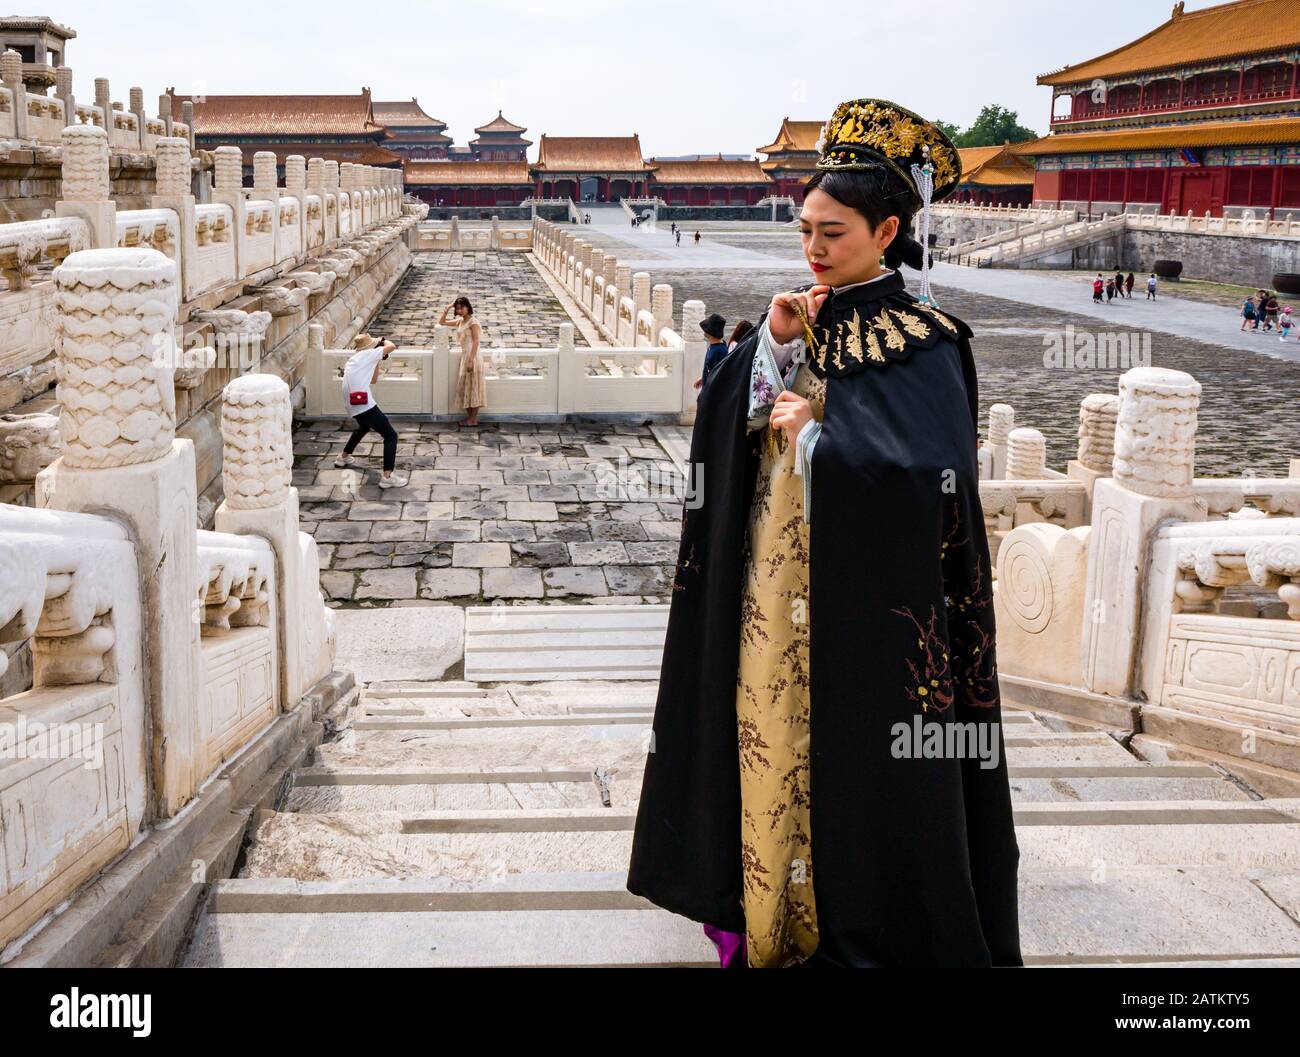 Woman posing wearing period royal Chinese costume with tourist taking a photo, Outer Court, Forbidden City, Beijing, China, Asia Stock Photo